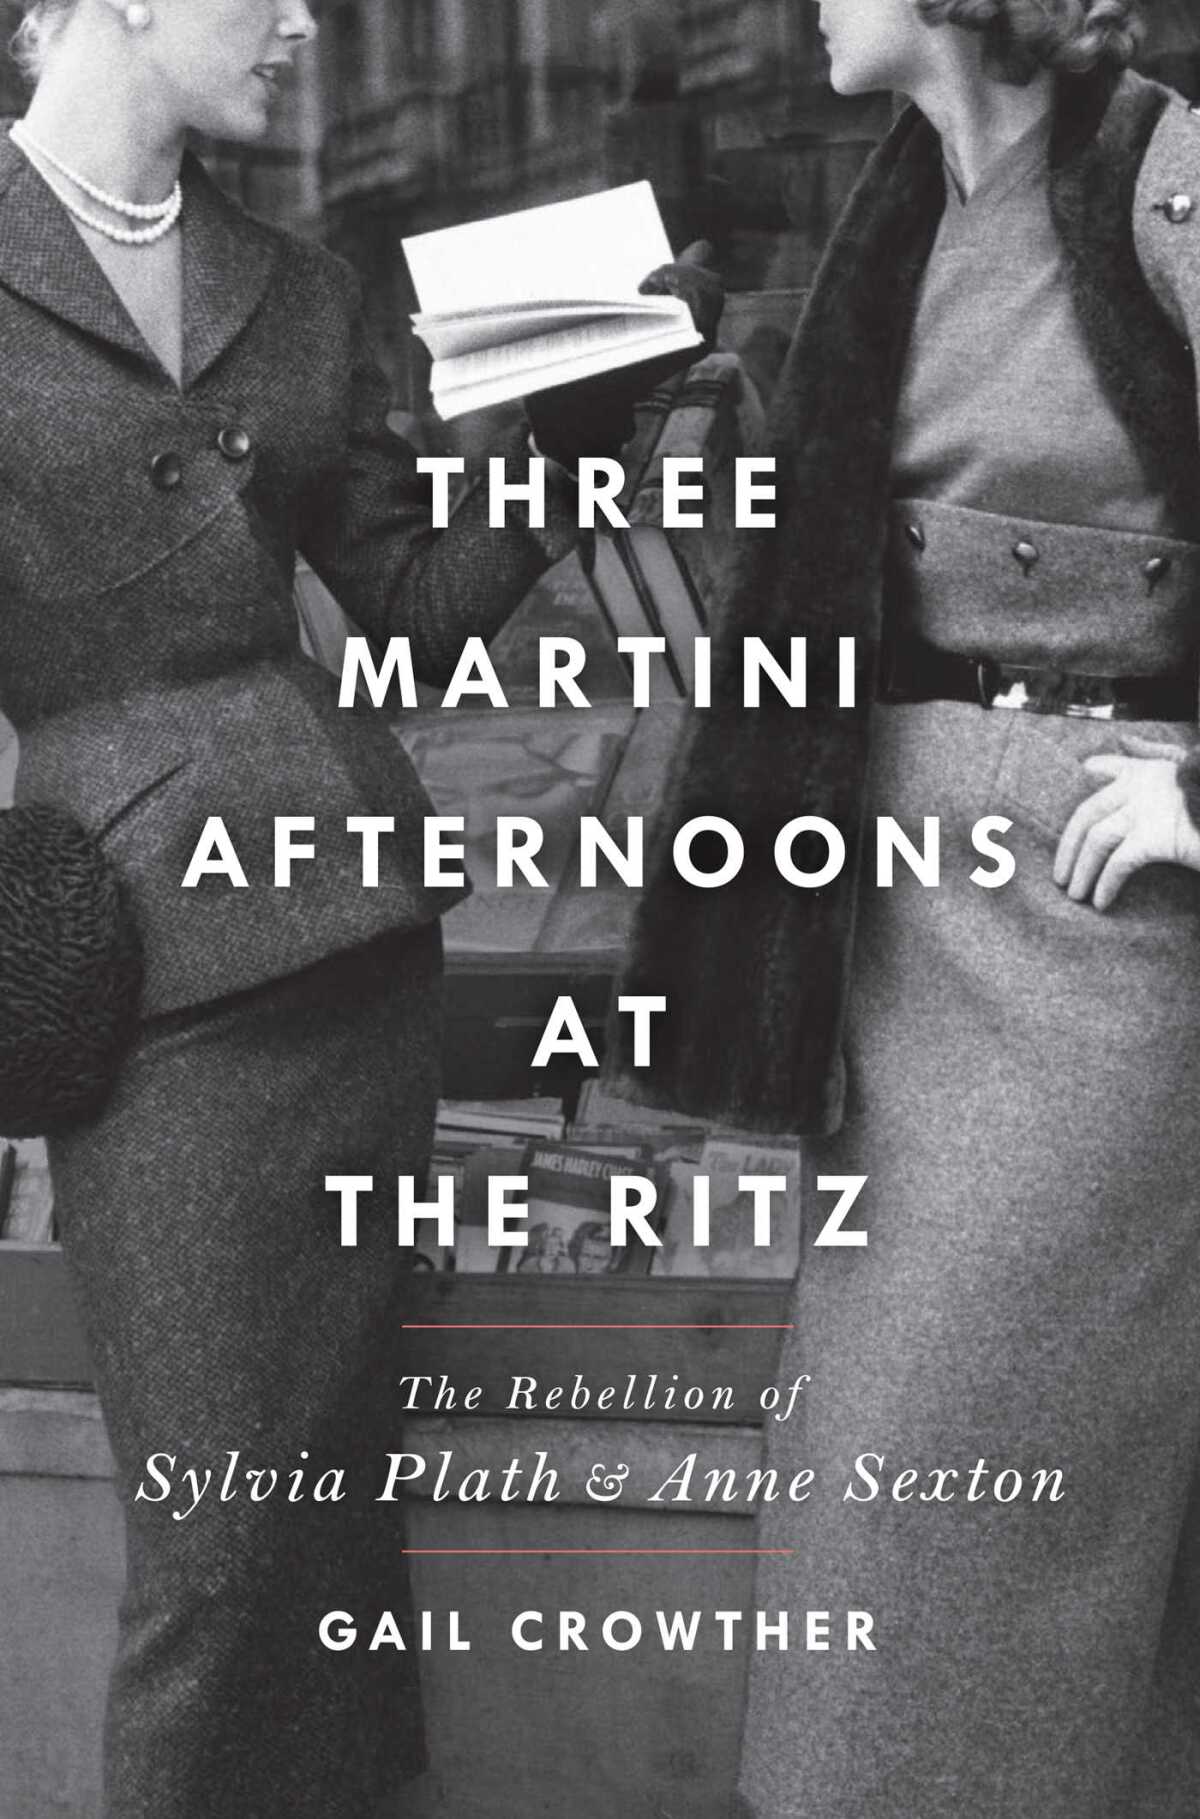 Jacket for "Three-Martini Afternoons at the Ritz: The Rebellion of Sylvia Plath & Anne Sexton" by Gail Crowther